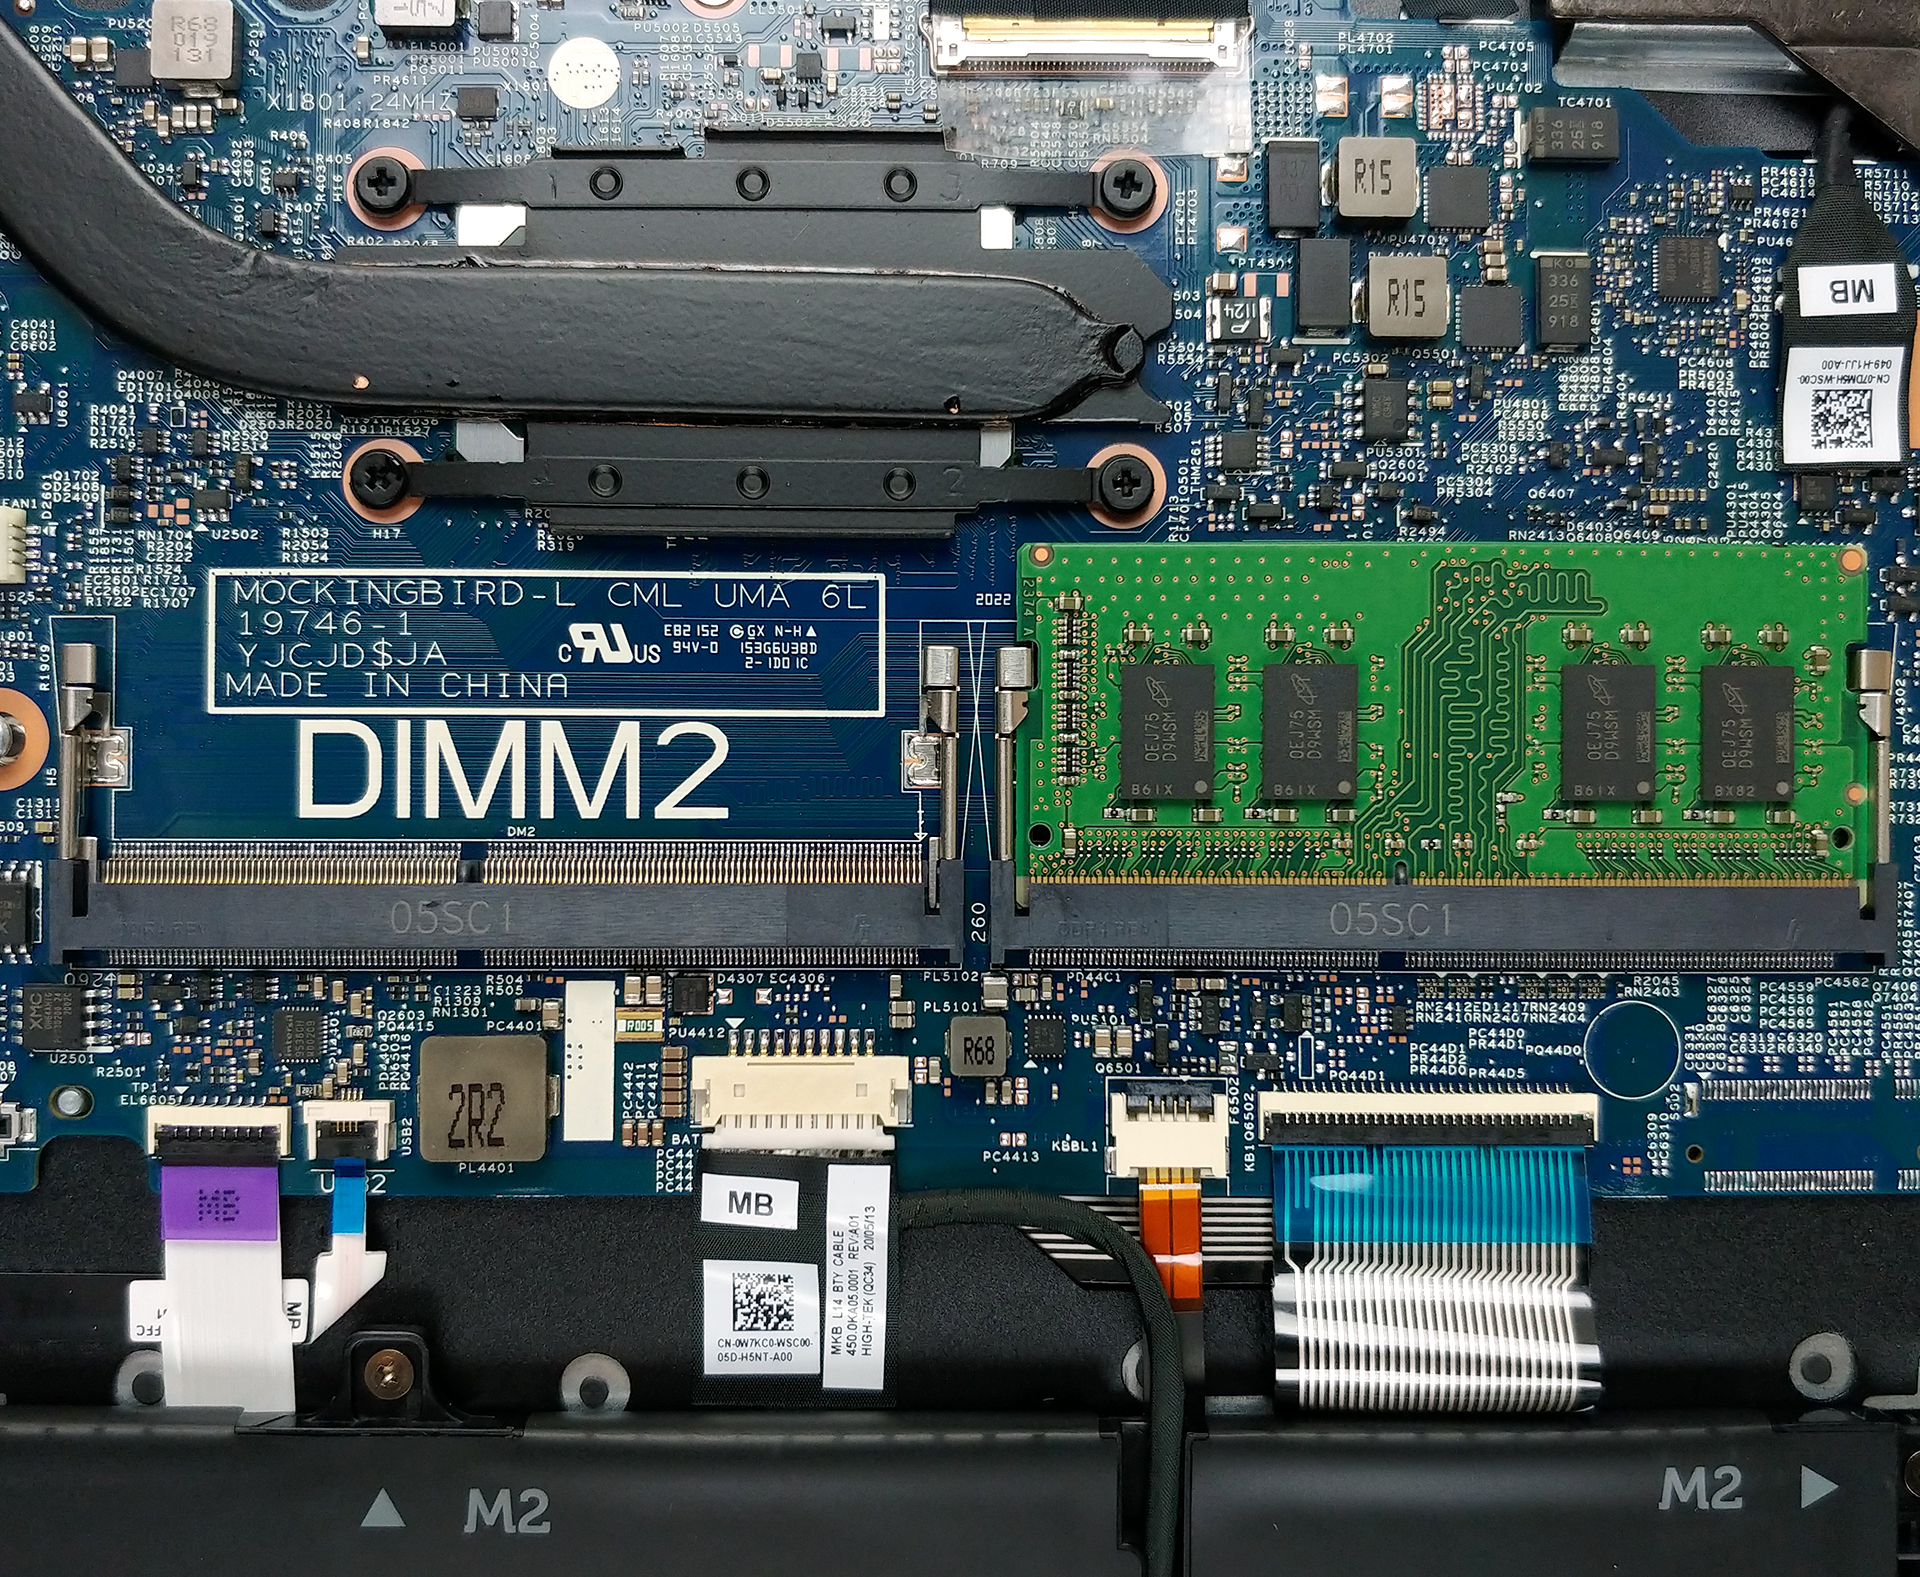 Inside Dell Latitude 15 3510 - disassembly and upgrade options |  